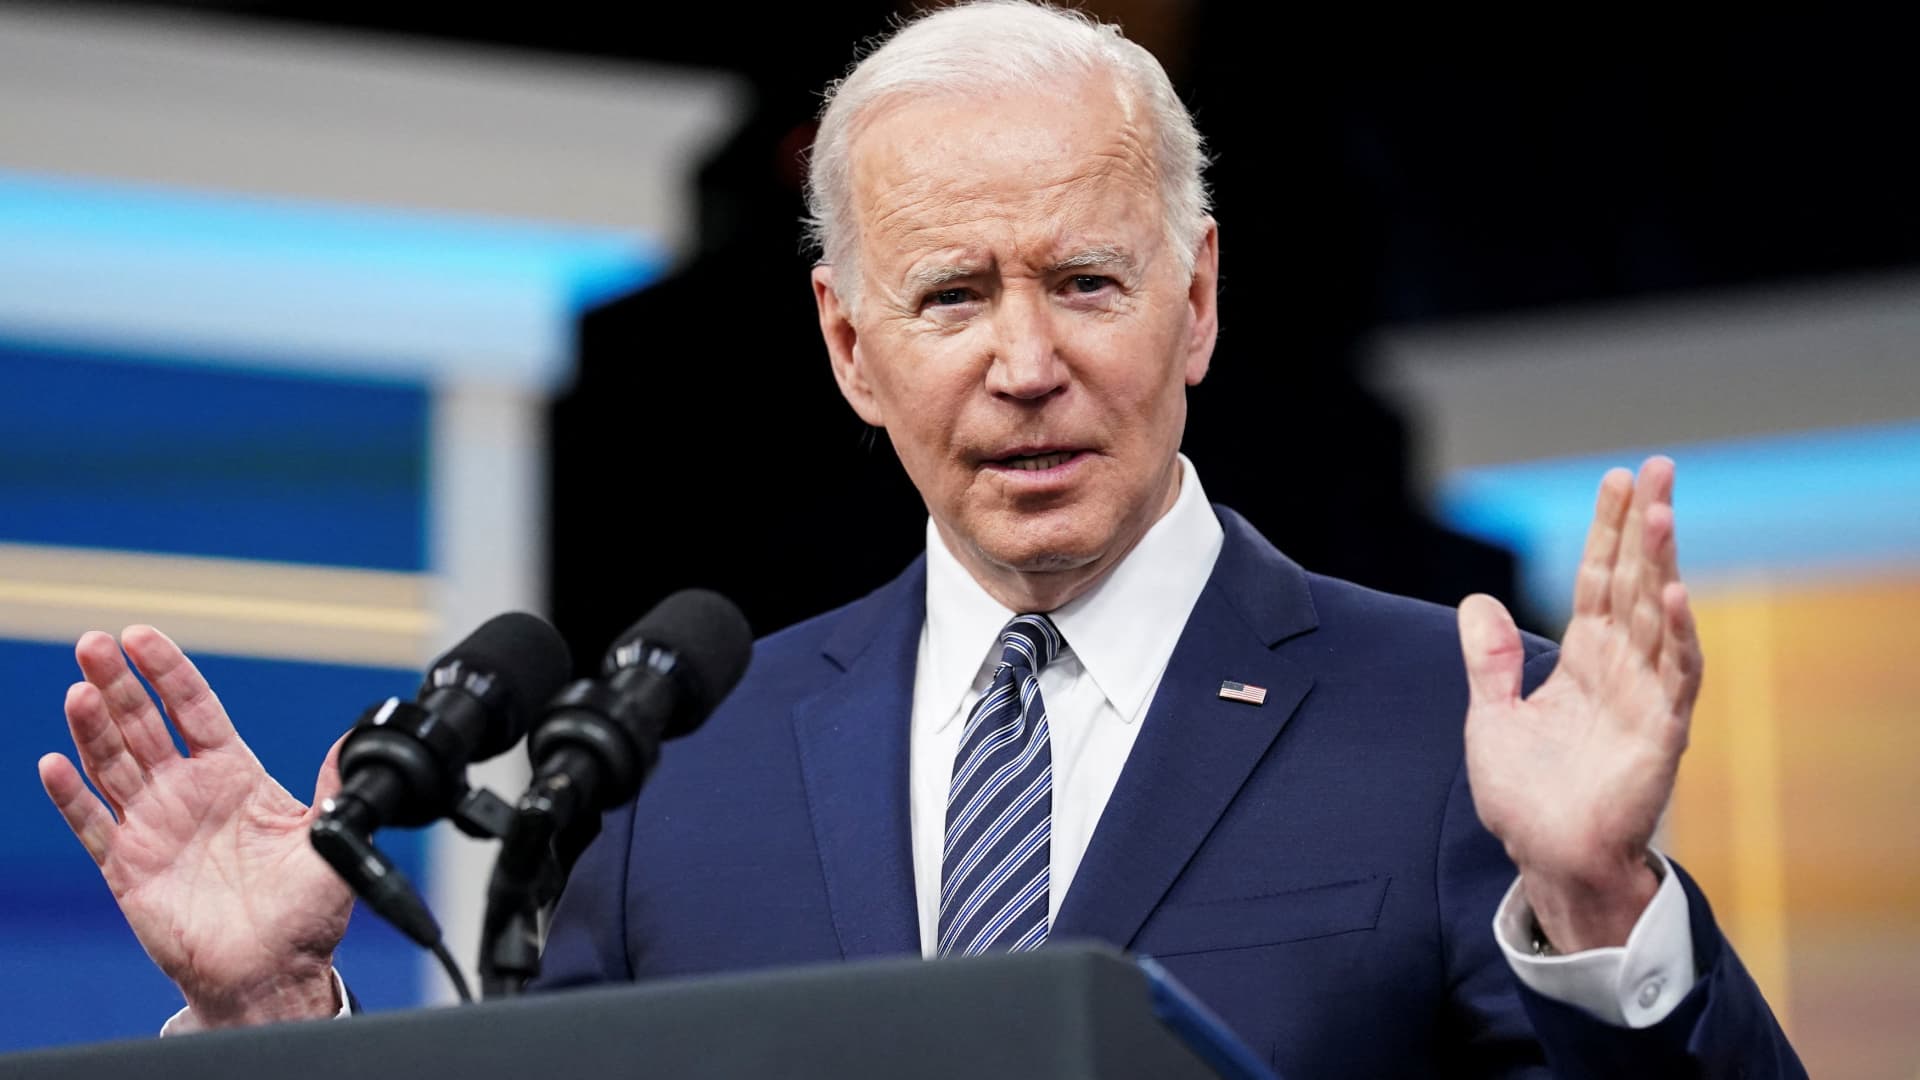 Environmental groups sue Biden to block oil and gas drilling permits